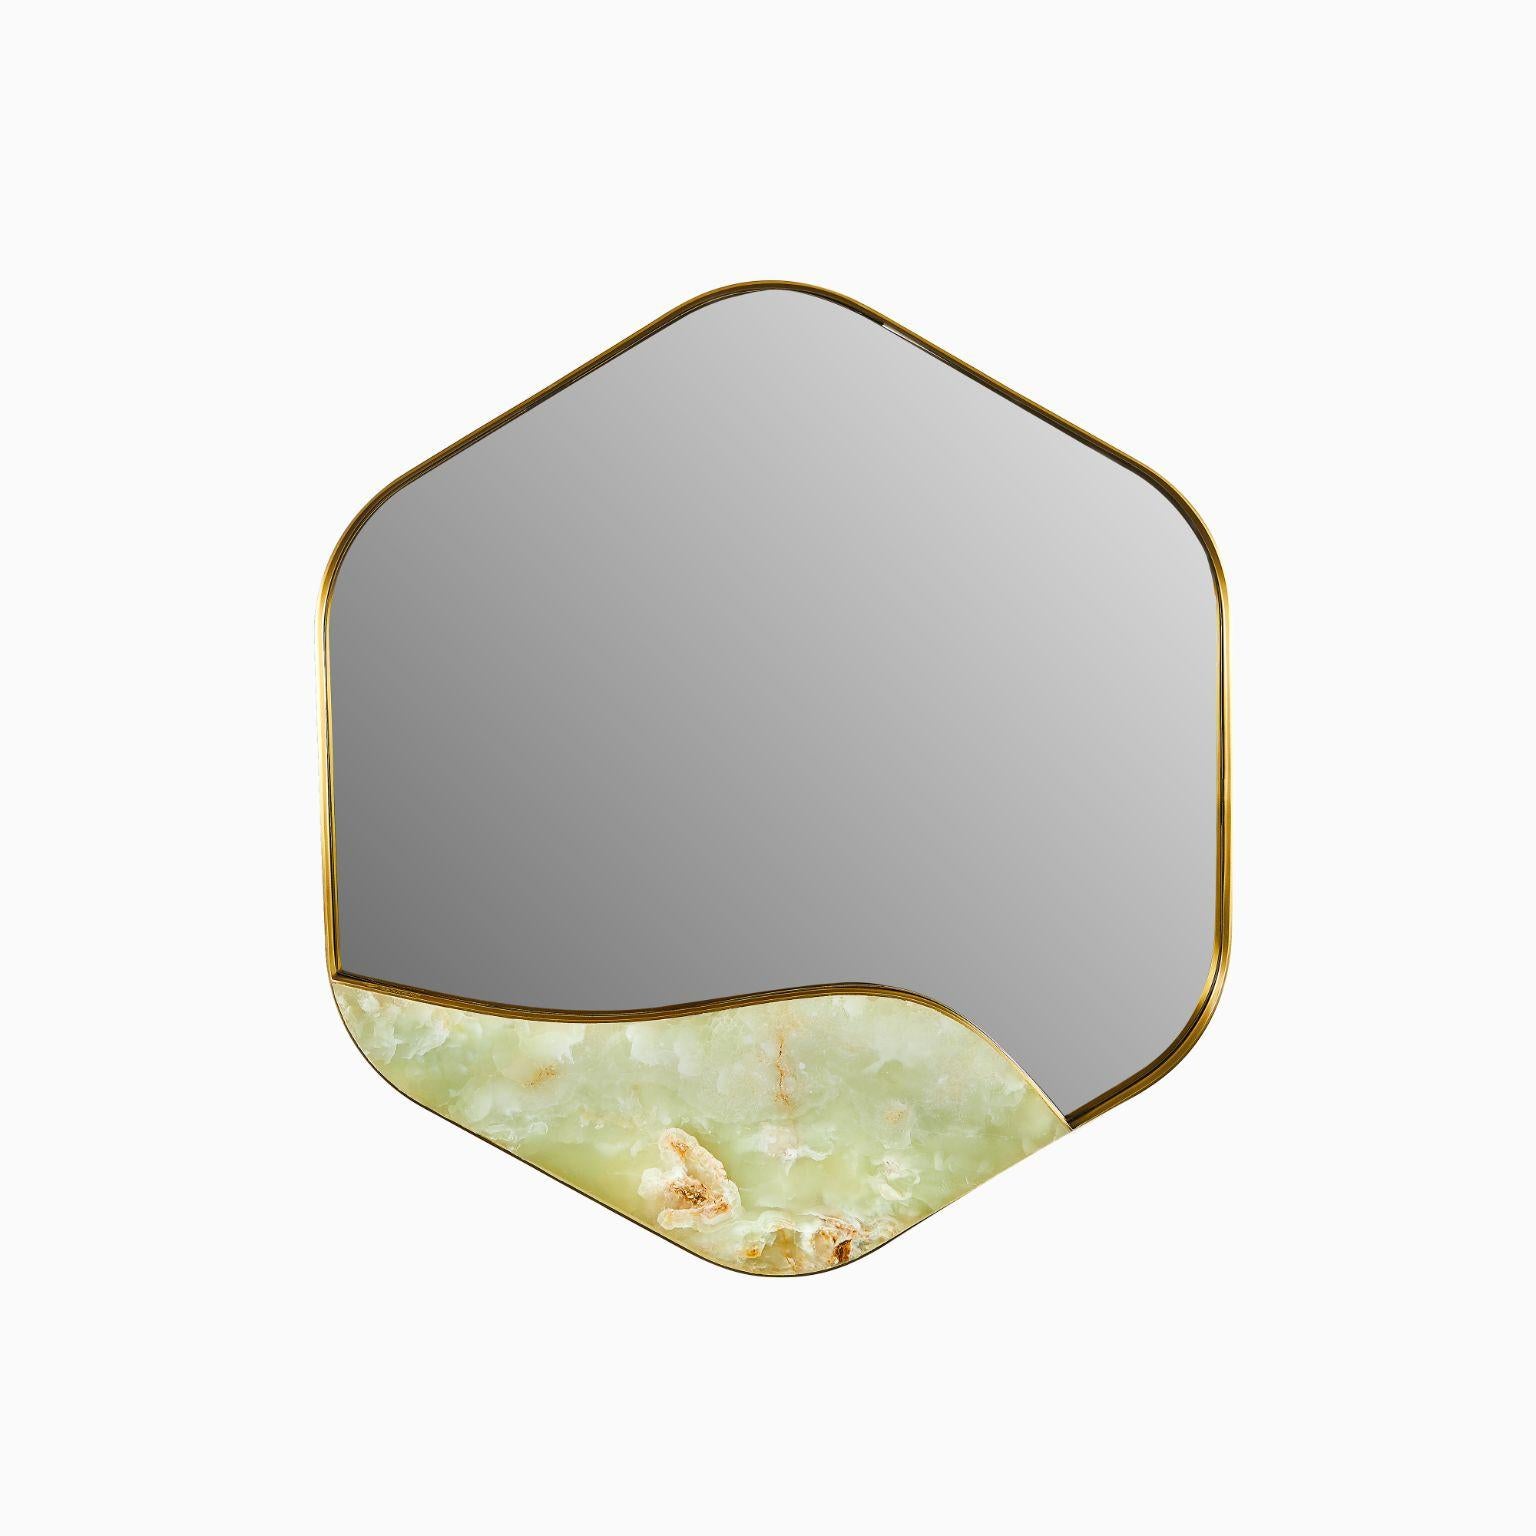 Aras mirror green onyx by Marble Balloon
Dimensions: L 5cm x W 83.5cm x H 76.5cm
Materials: Brass, onyx green stone.

100% brass material is used in the frame and green onyx stone is used in the lower part.

Marble balloon is an interior design and